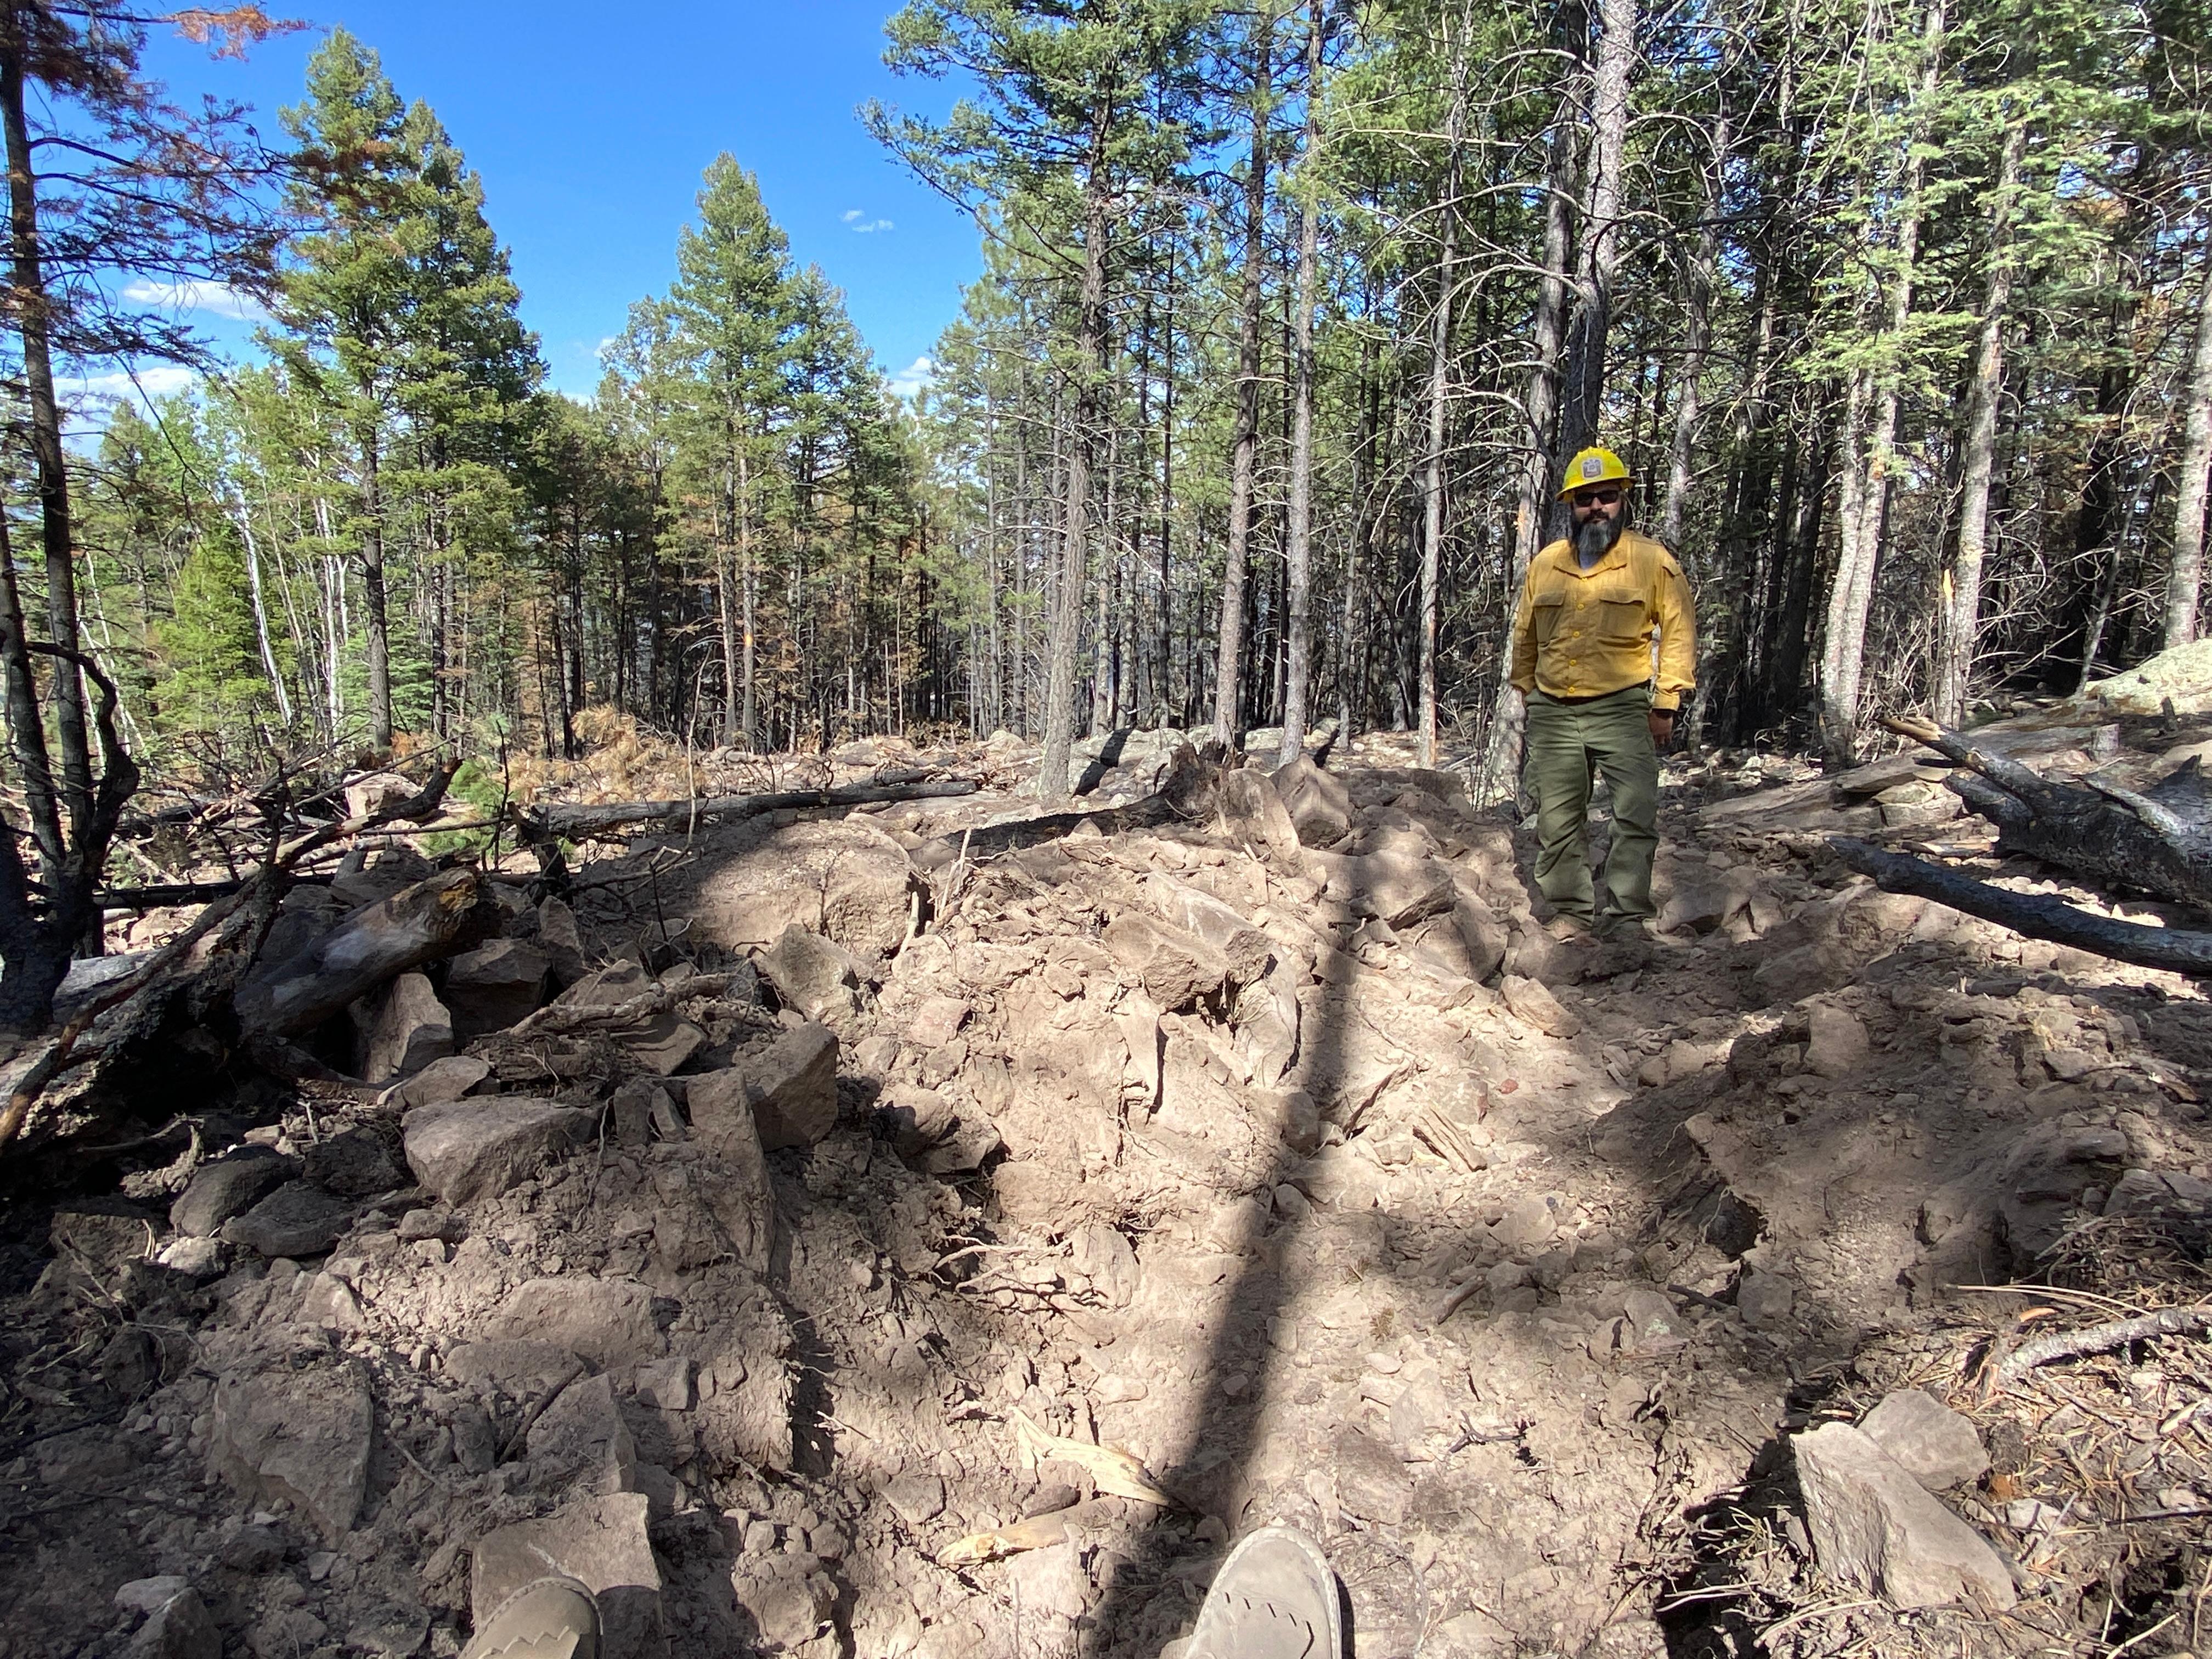 Firefighter in yellow shirt and hardhat stands in a constructed water bar built up with rocks.  Rocks and trees covering a previously constructed dozer line.